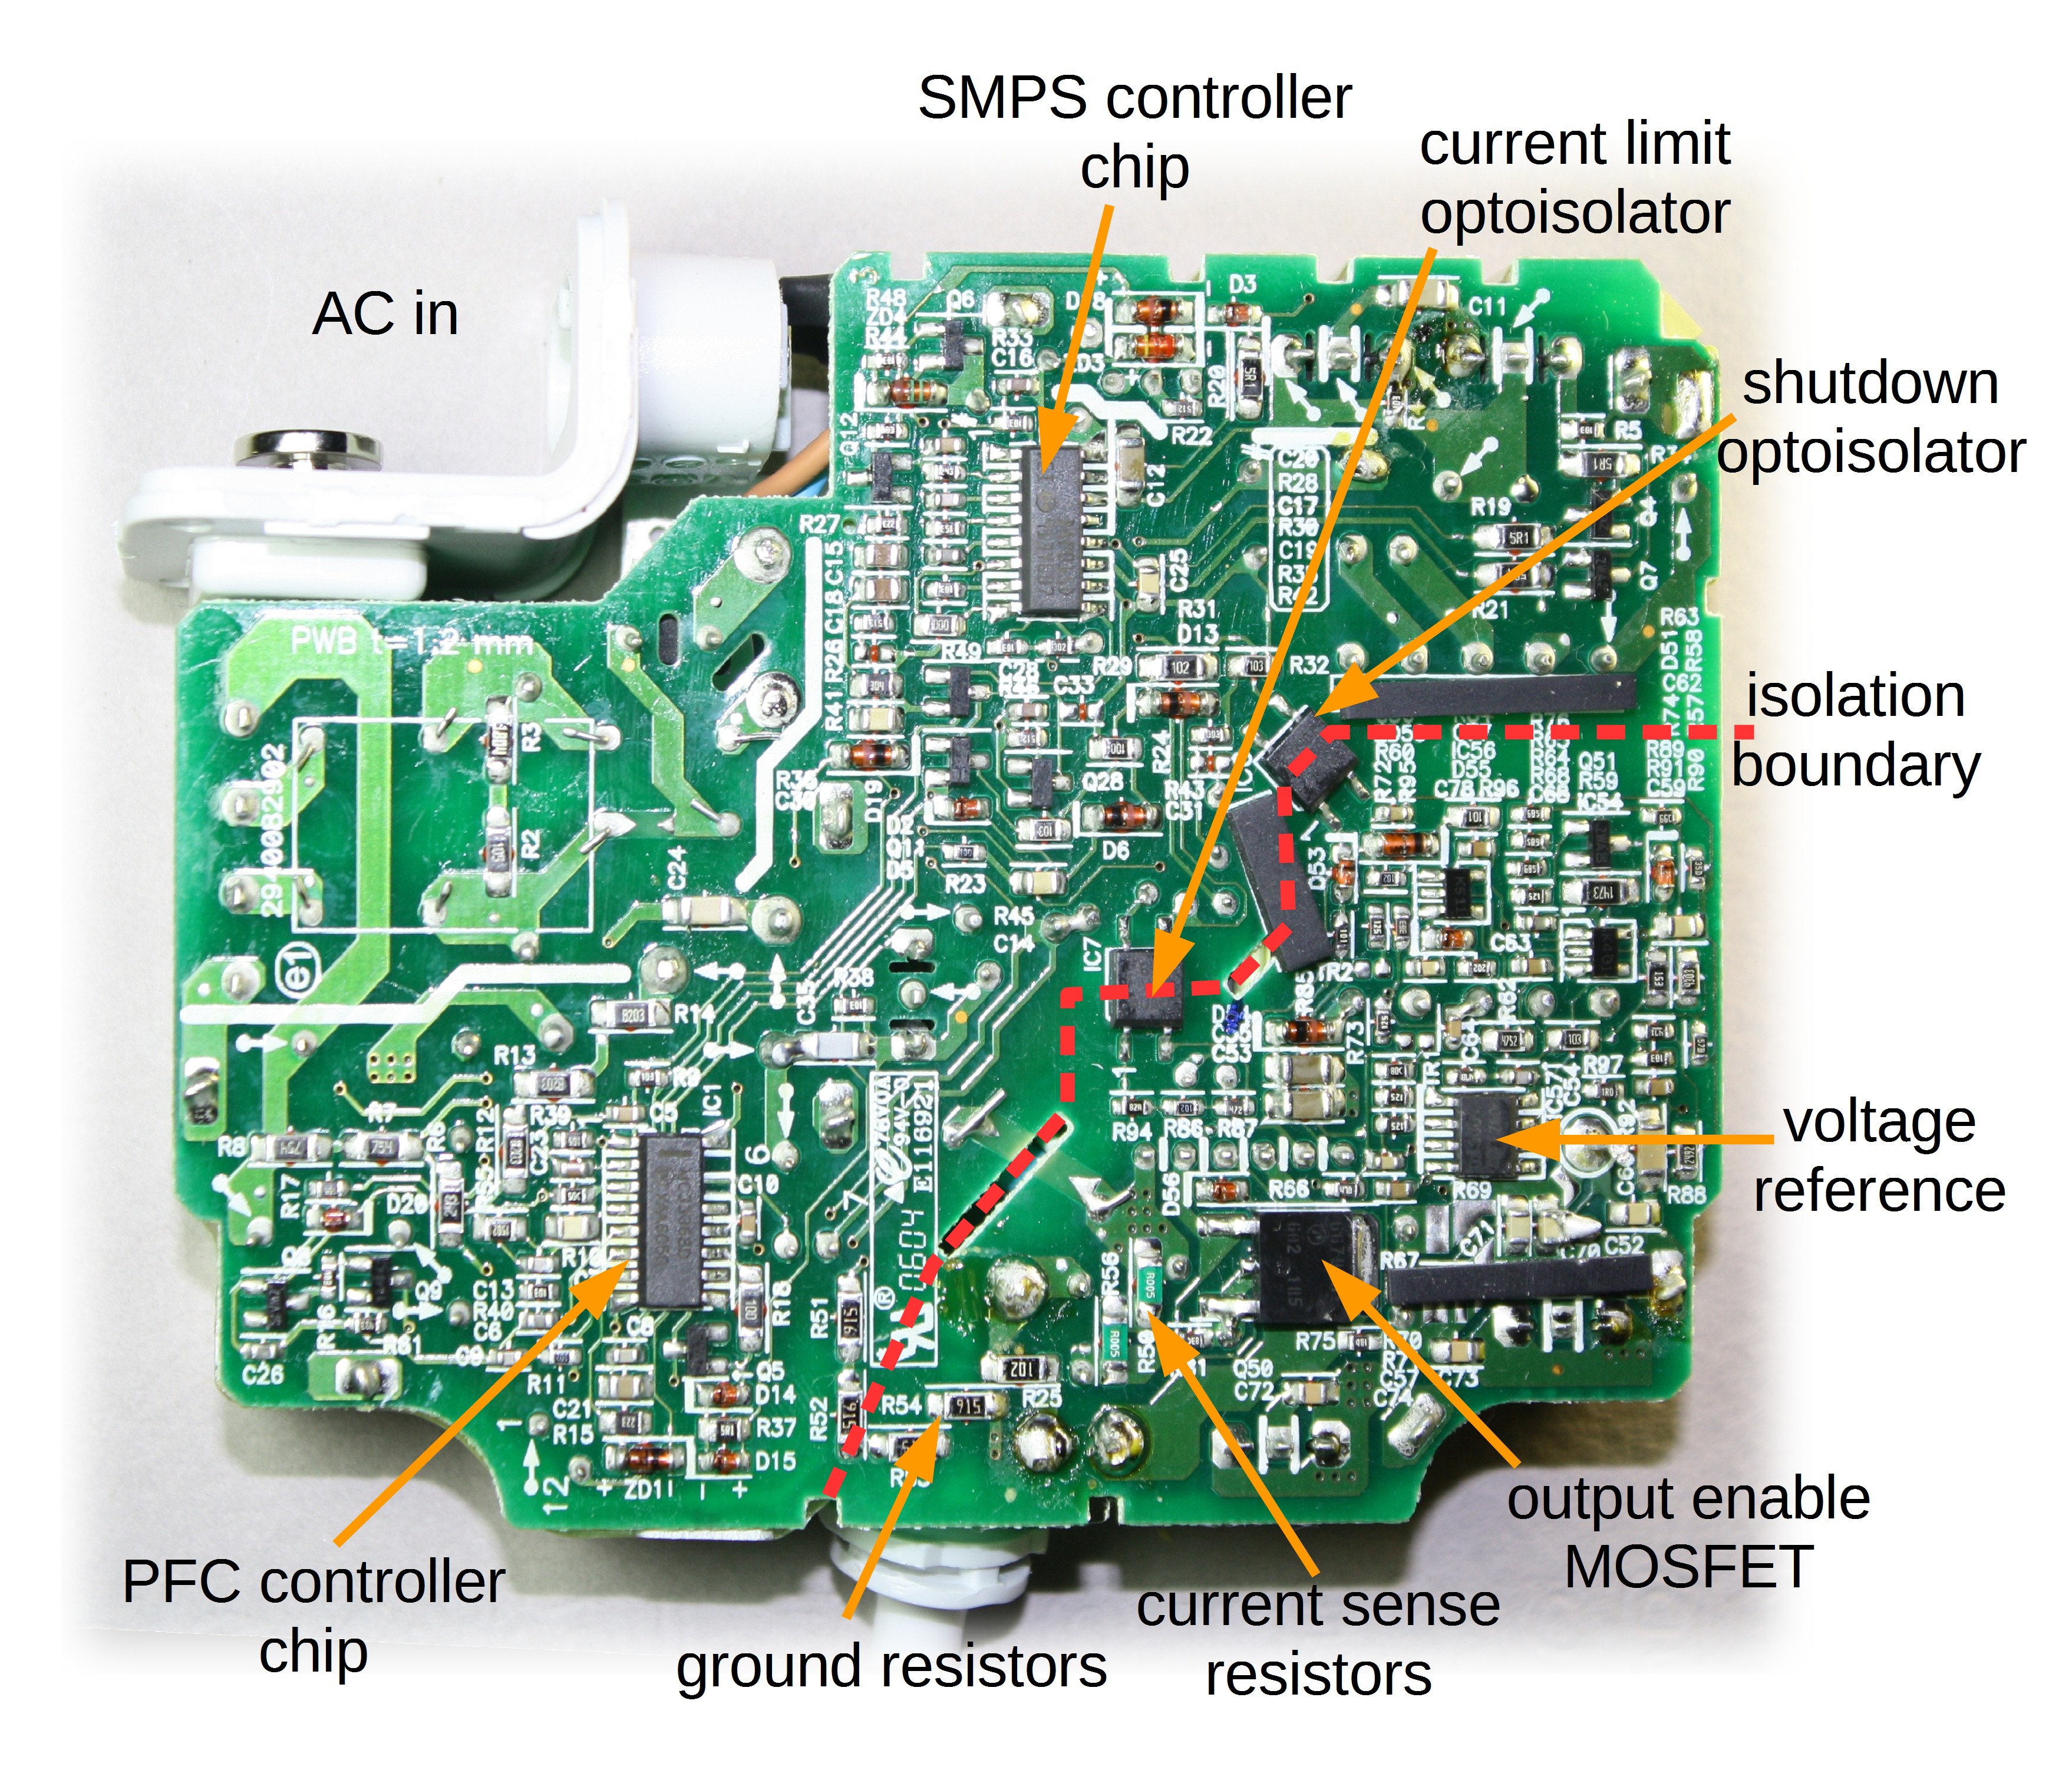 The printed circuit board from an Apple 85W Macbook power supply showing the tiny ponents